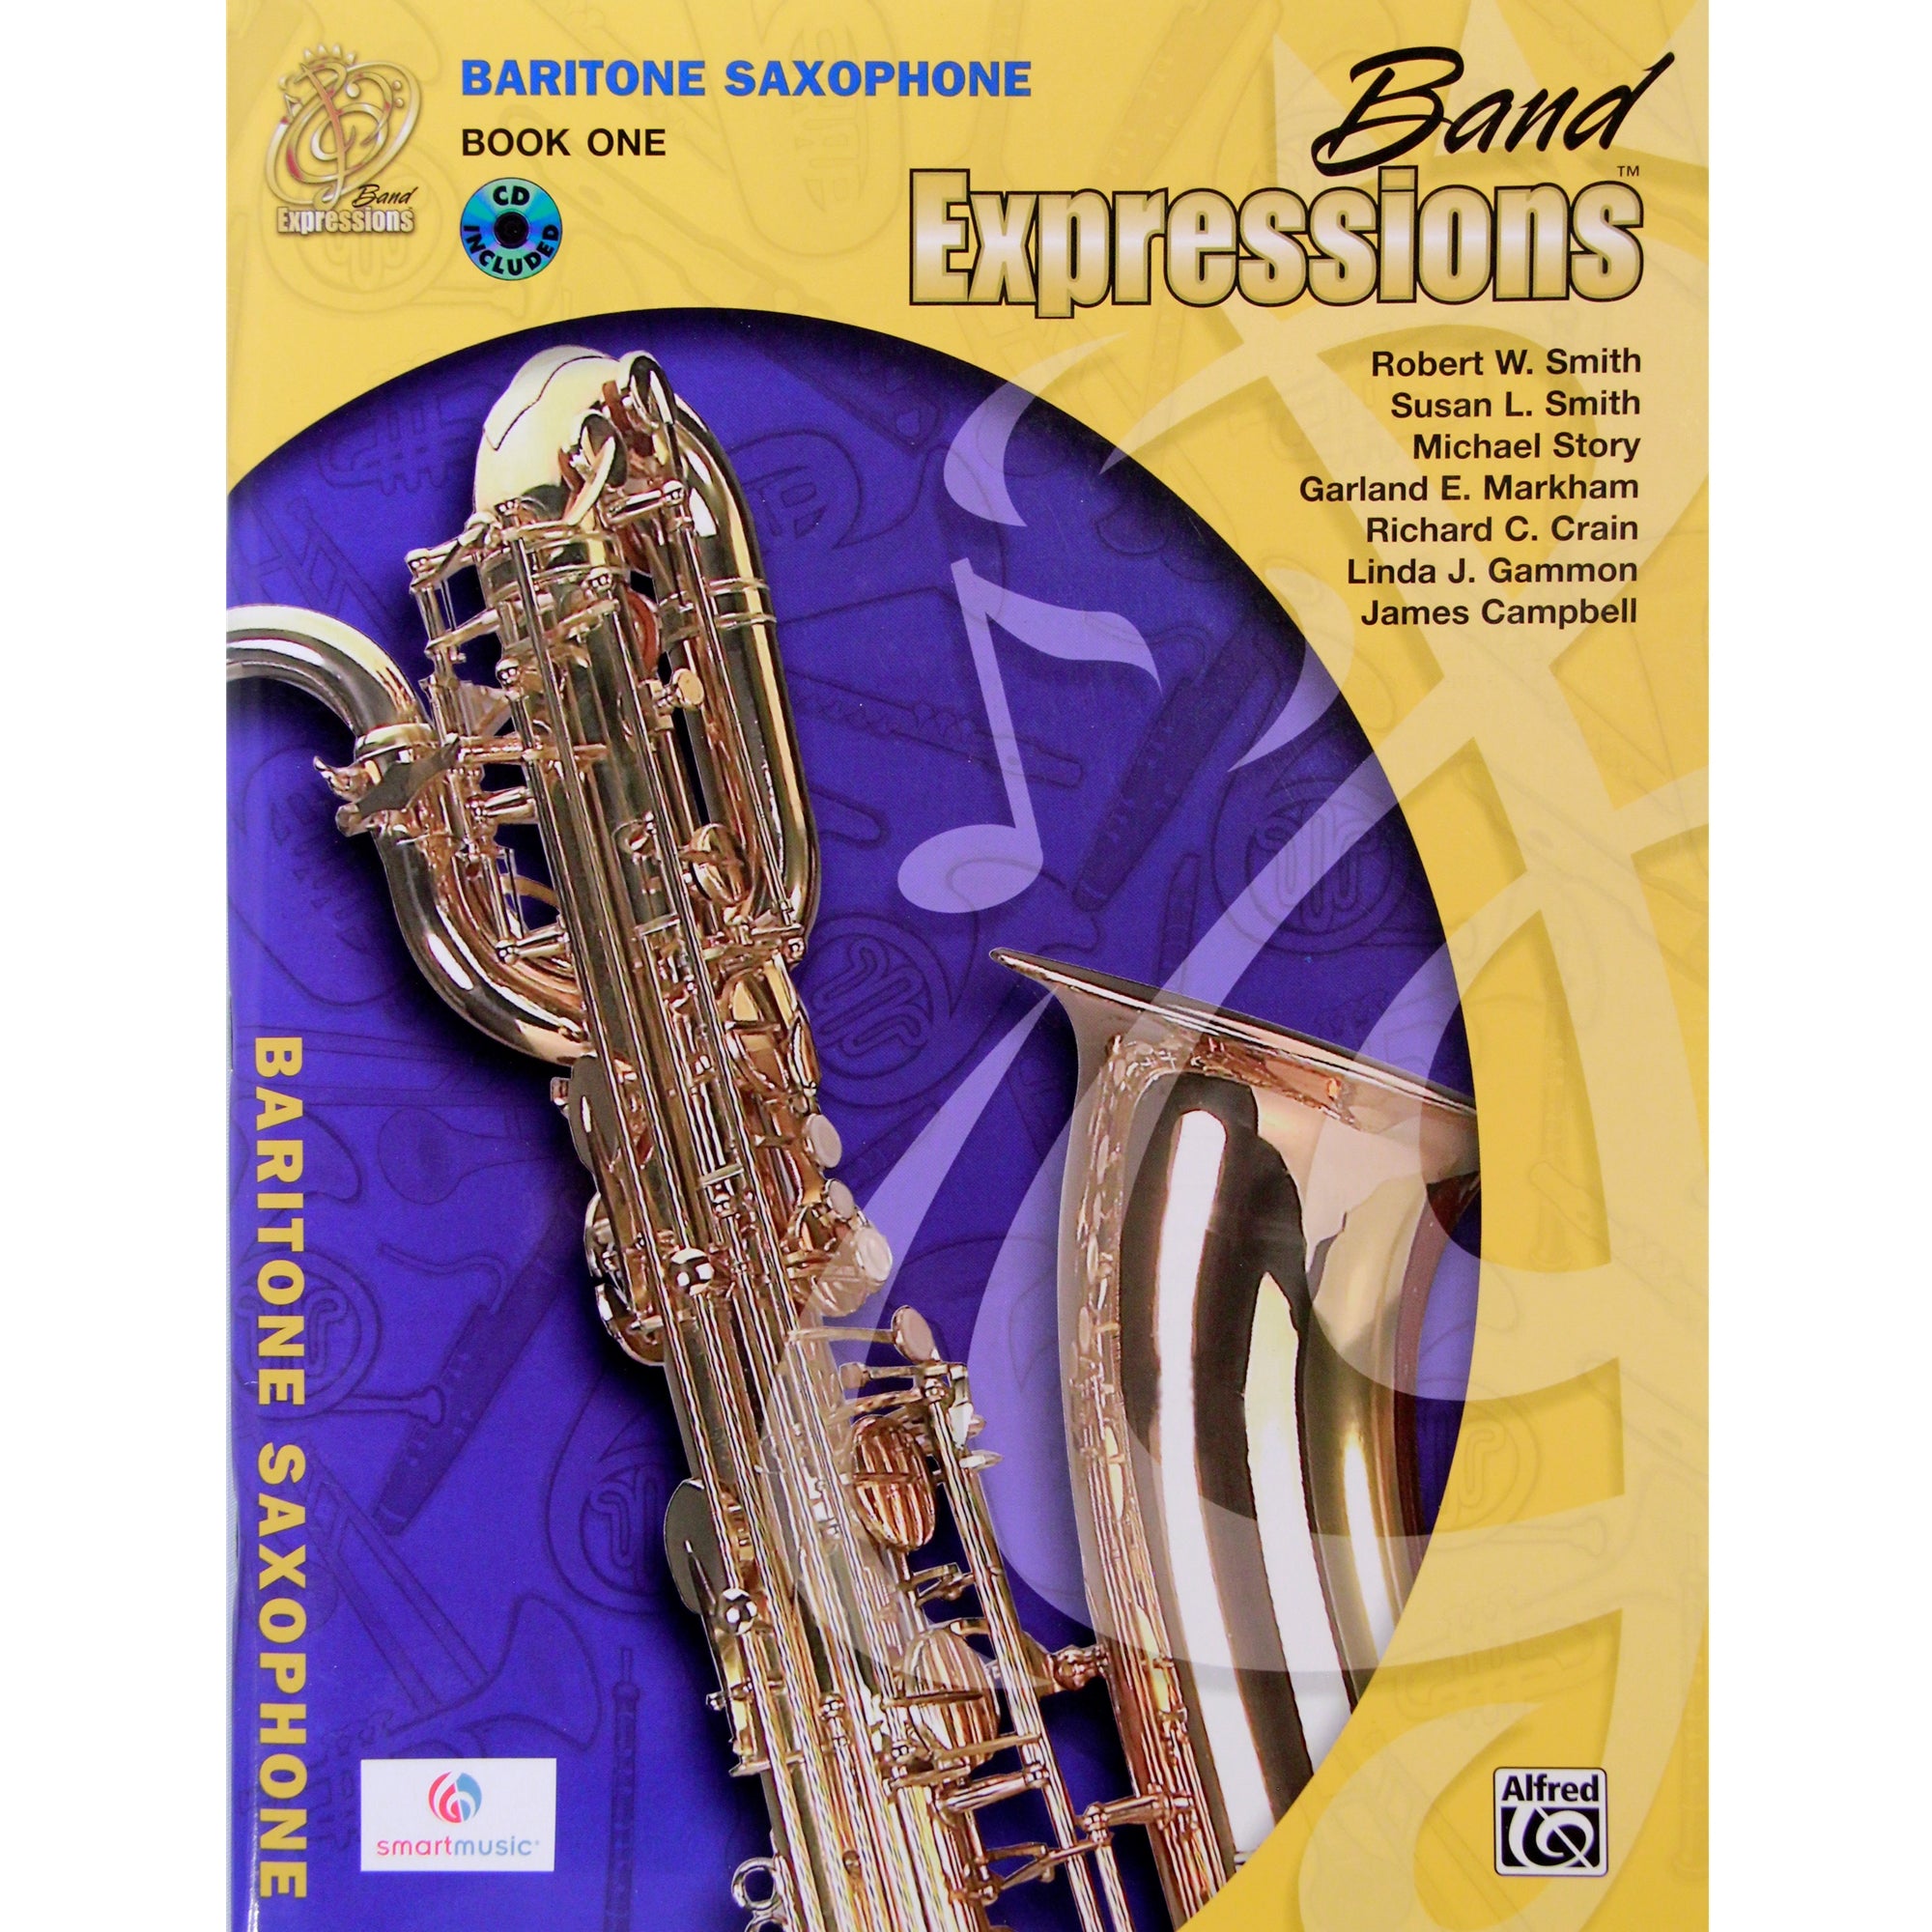 ALFRED 00MCB1010CDX Band Expressions , Book One: Student Edition [Baritone Saxophone]